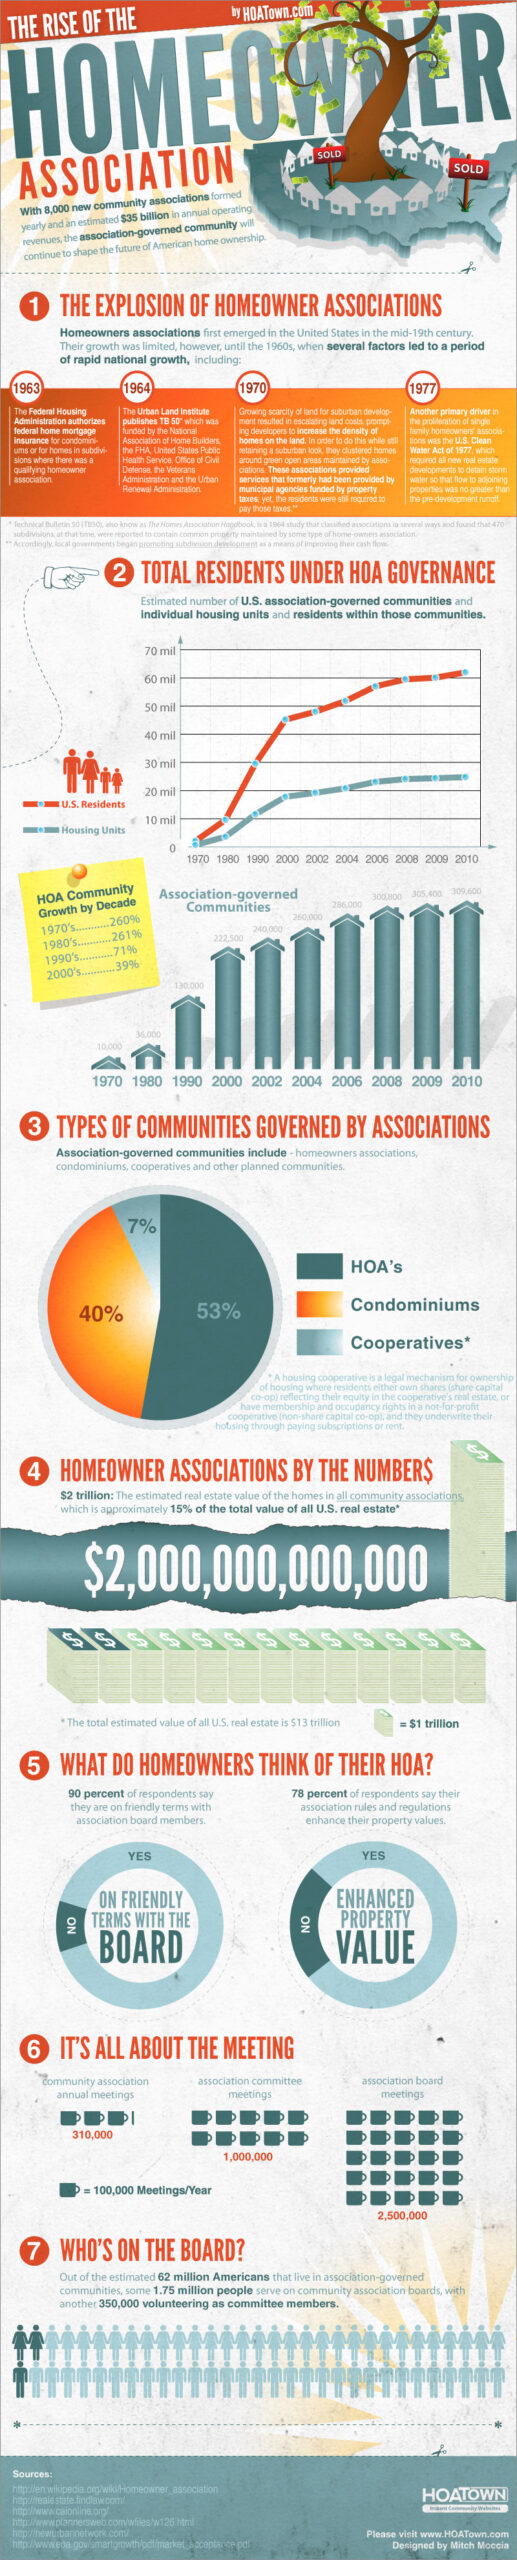 infographic about homeowners associations